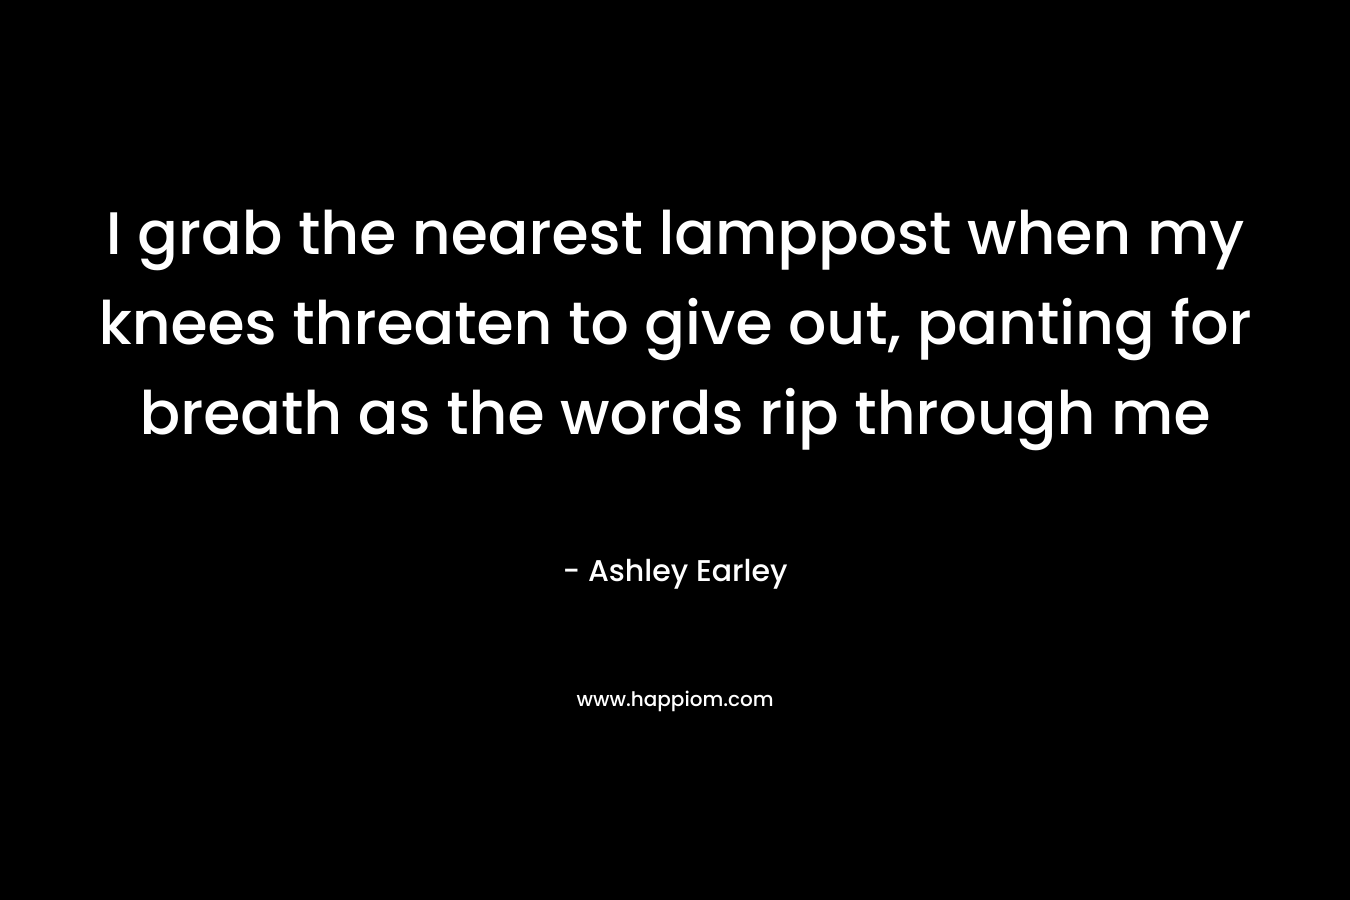 I grab the nearest lamppost when my knees threaten to give out, panting for breath as the words rip through me – Ashley Earley